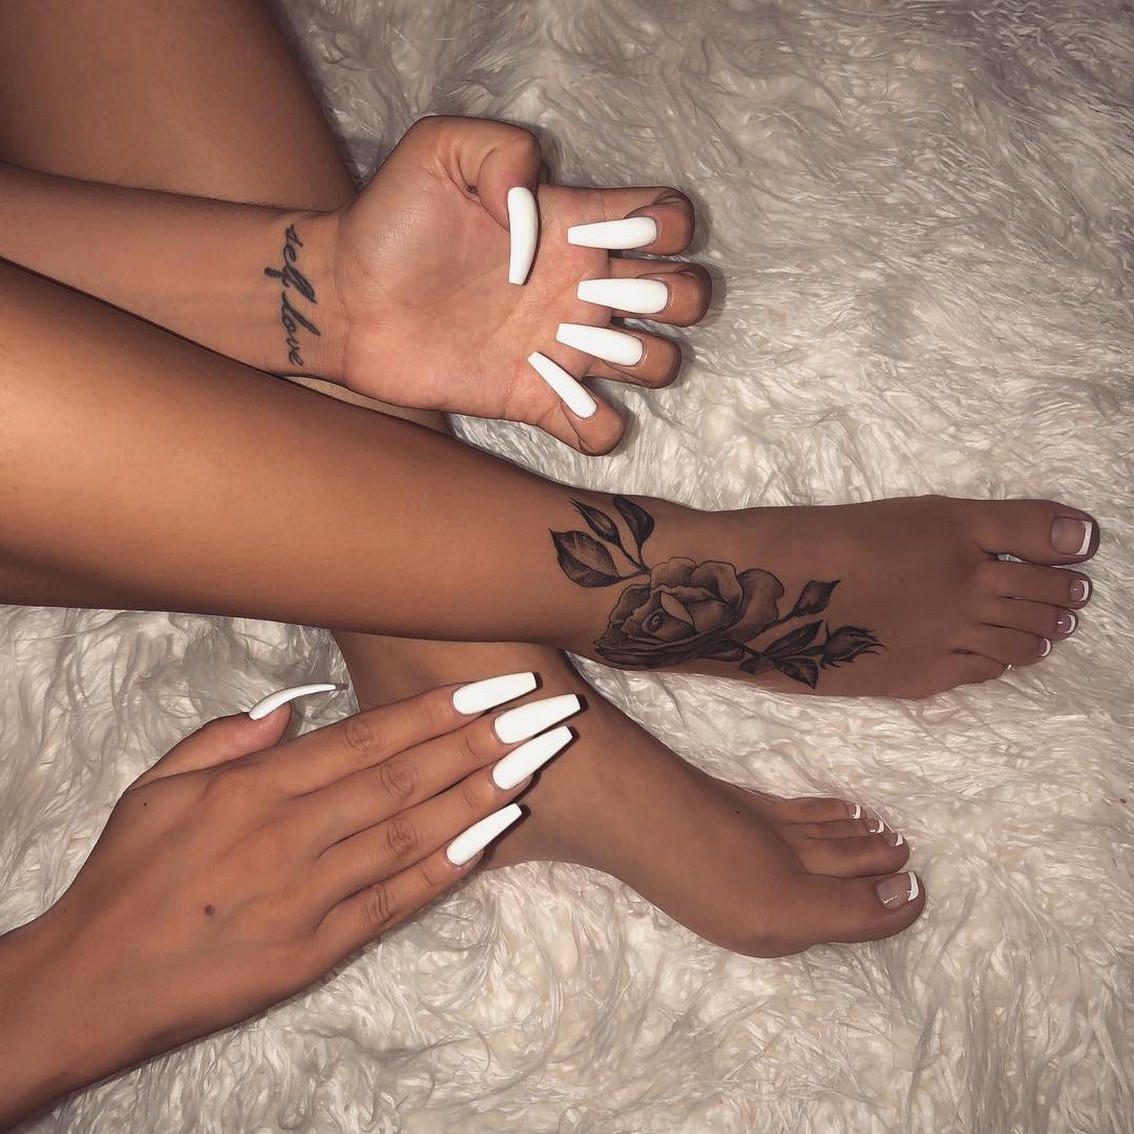 Alycia Tyre's Feet And Nails